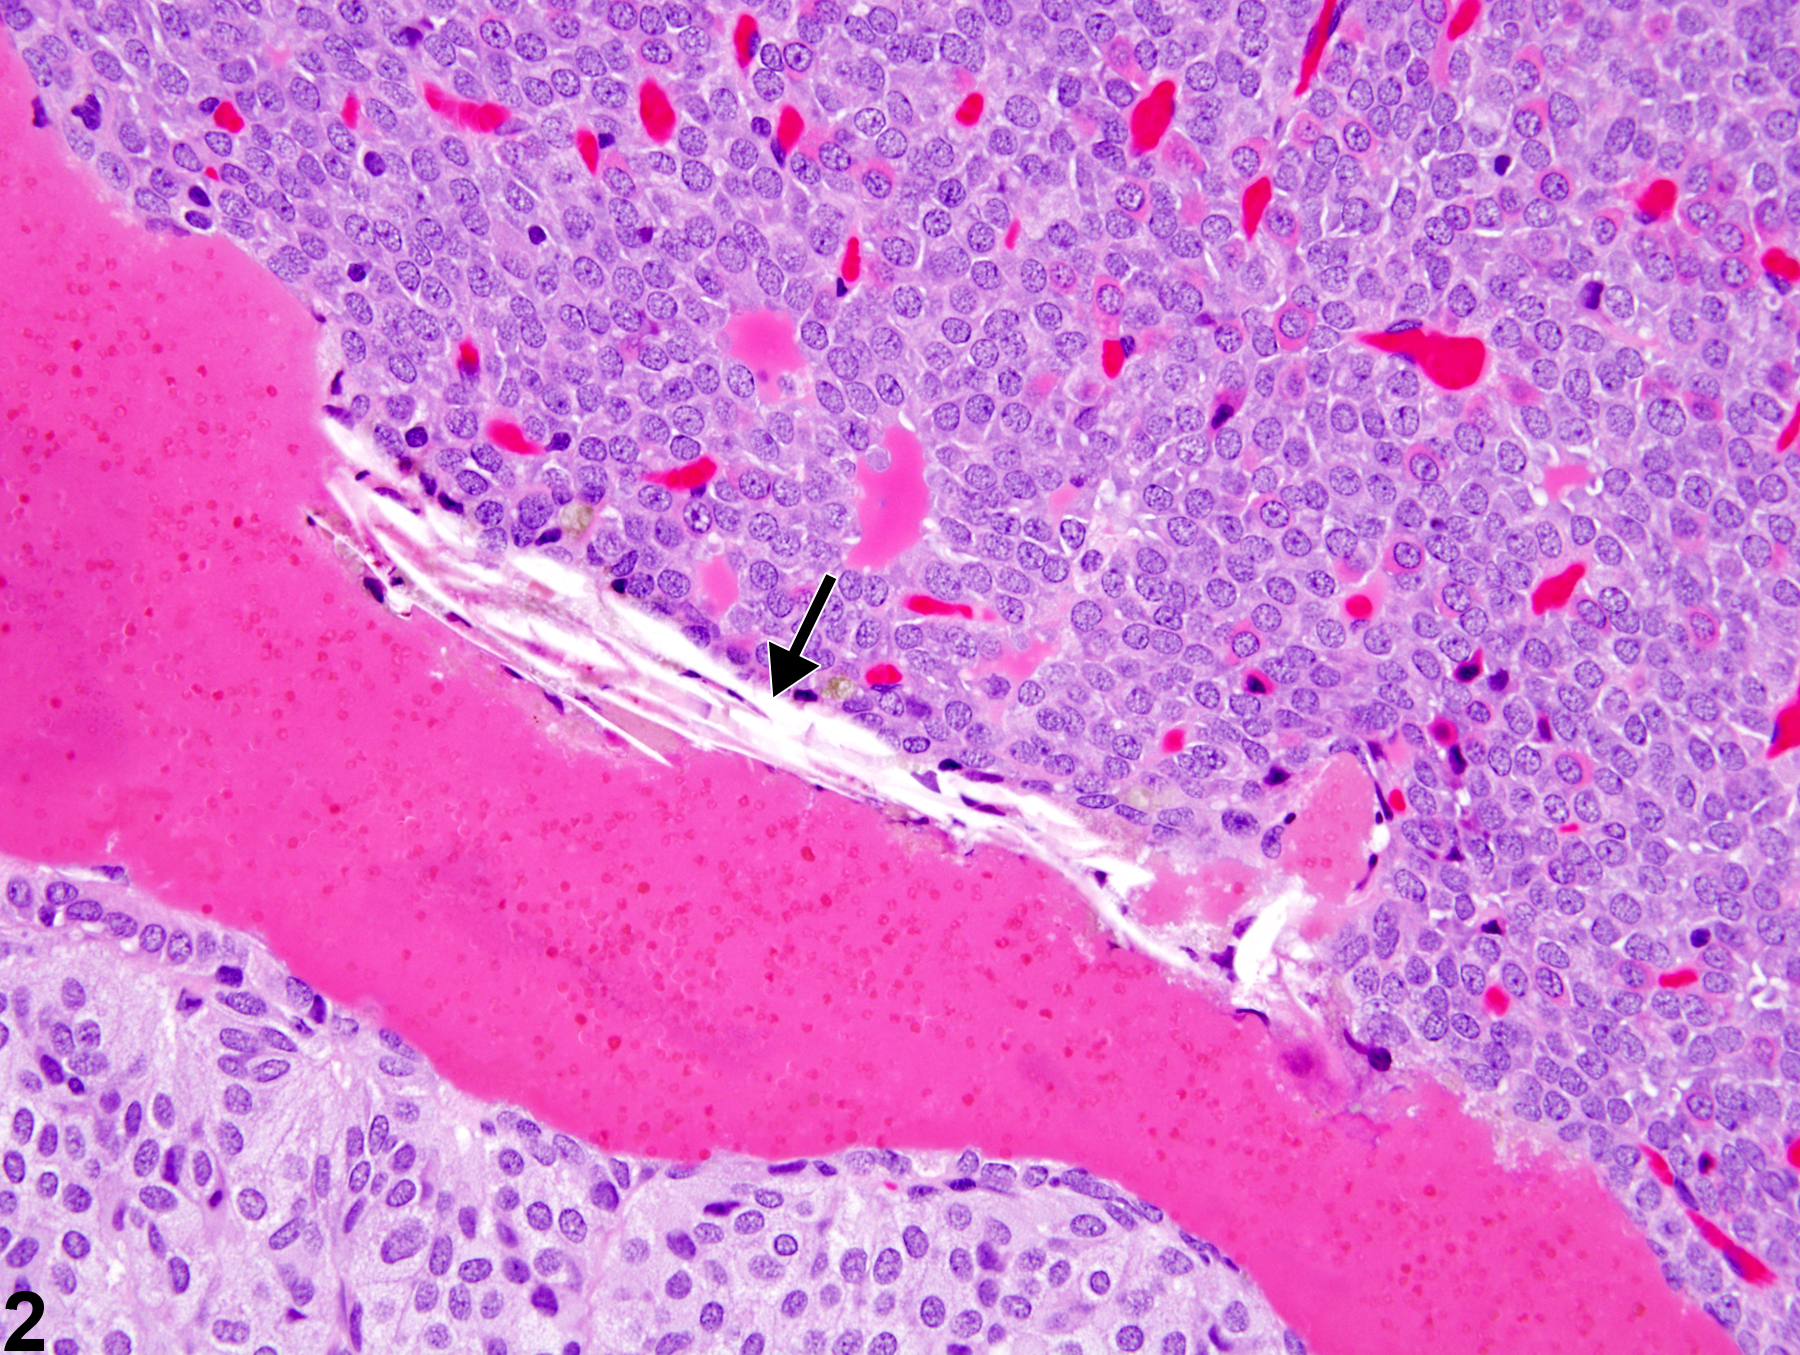 Image of Rathke's cleft dilation in the pituitary gland from a female F344/N rat in a chronic study